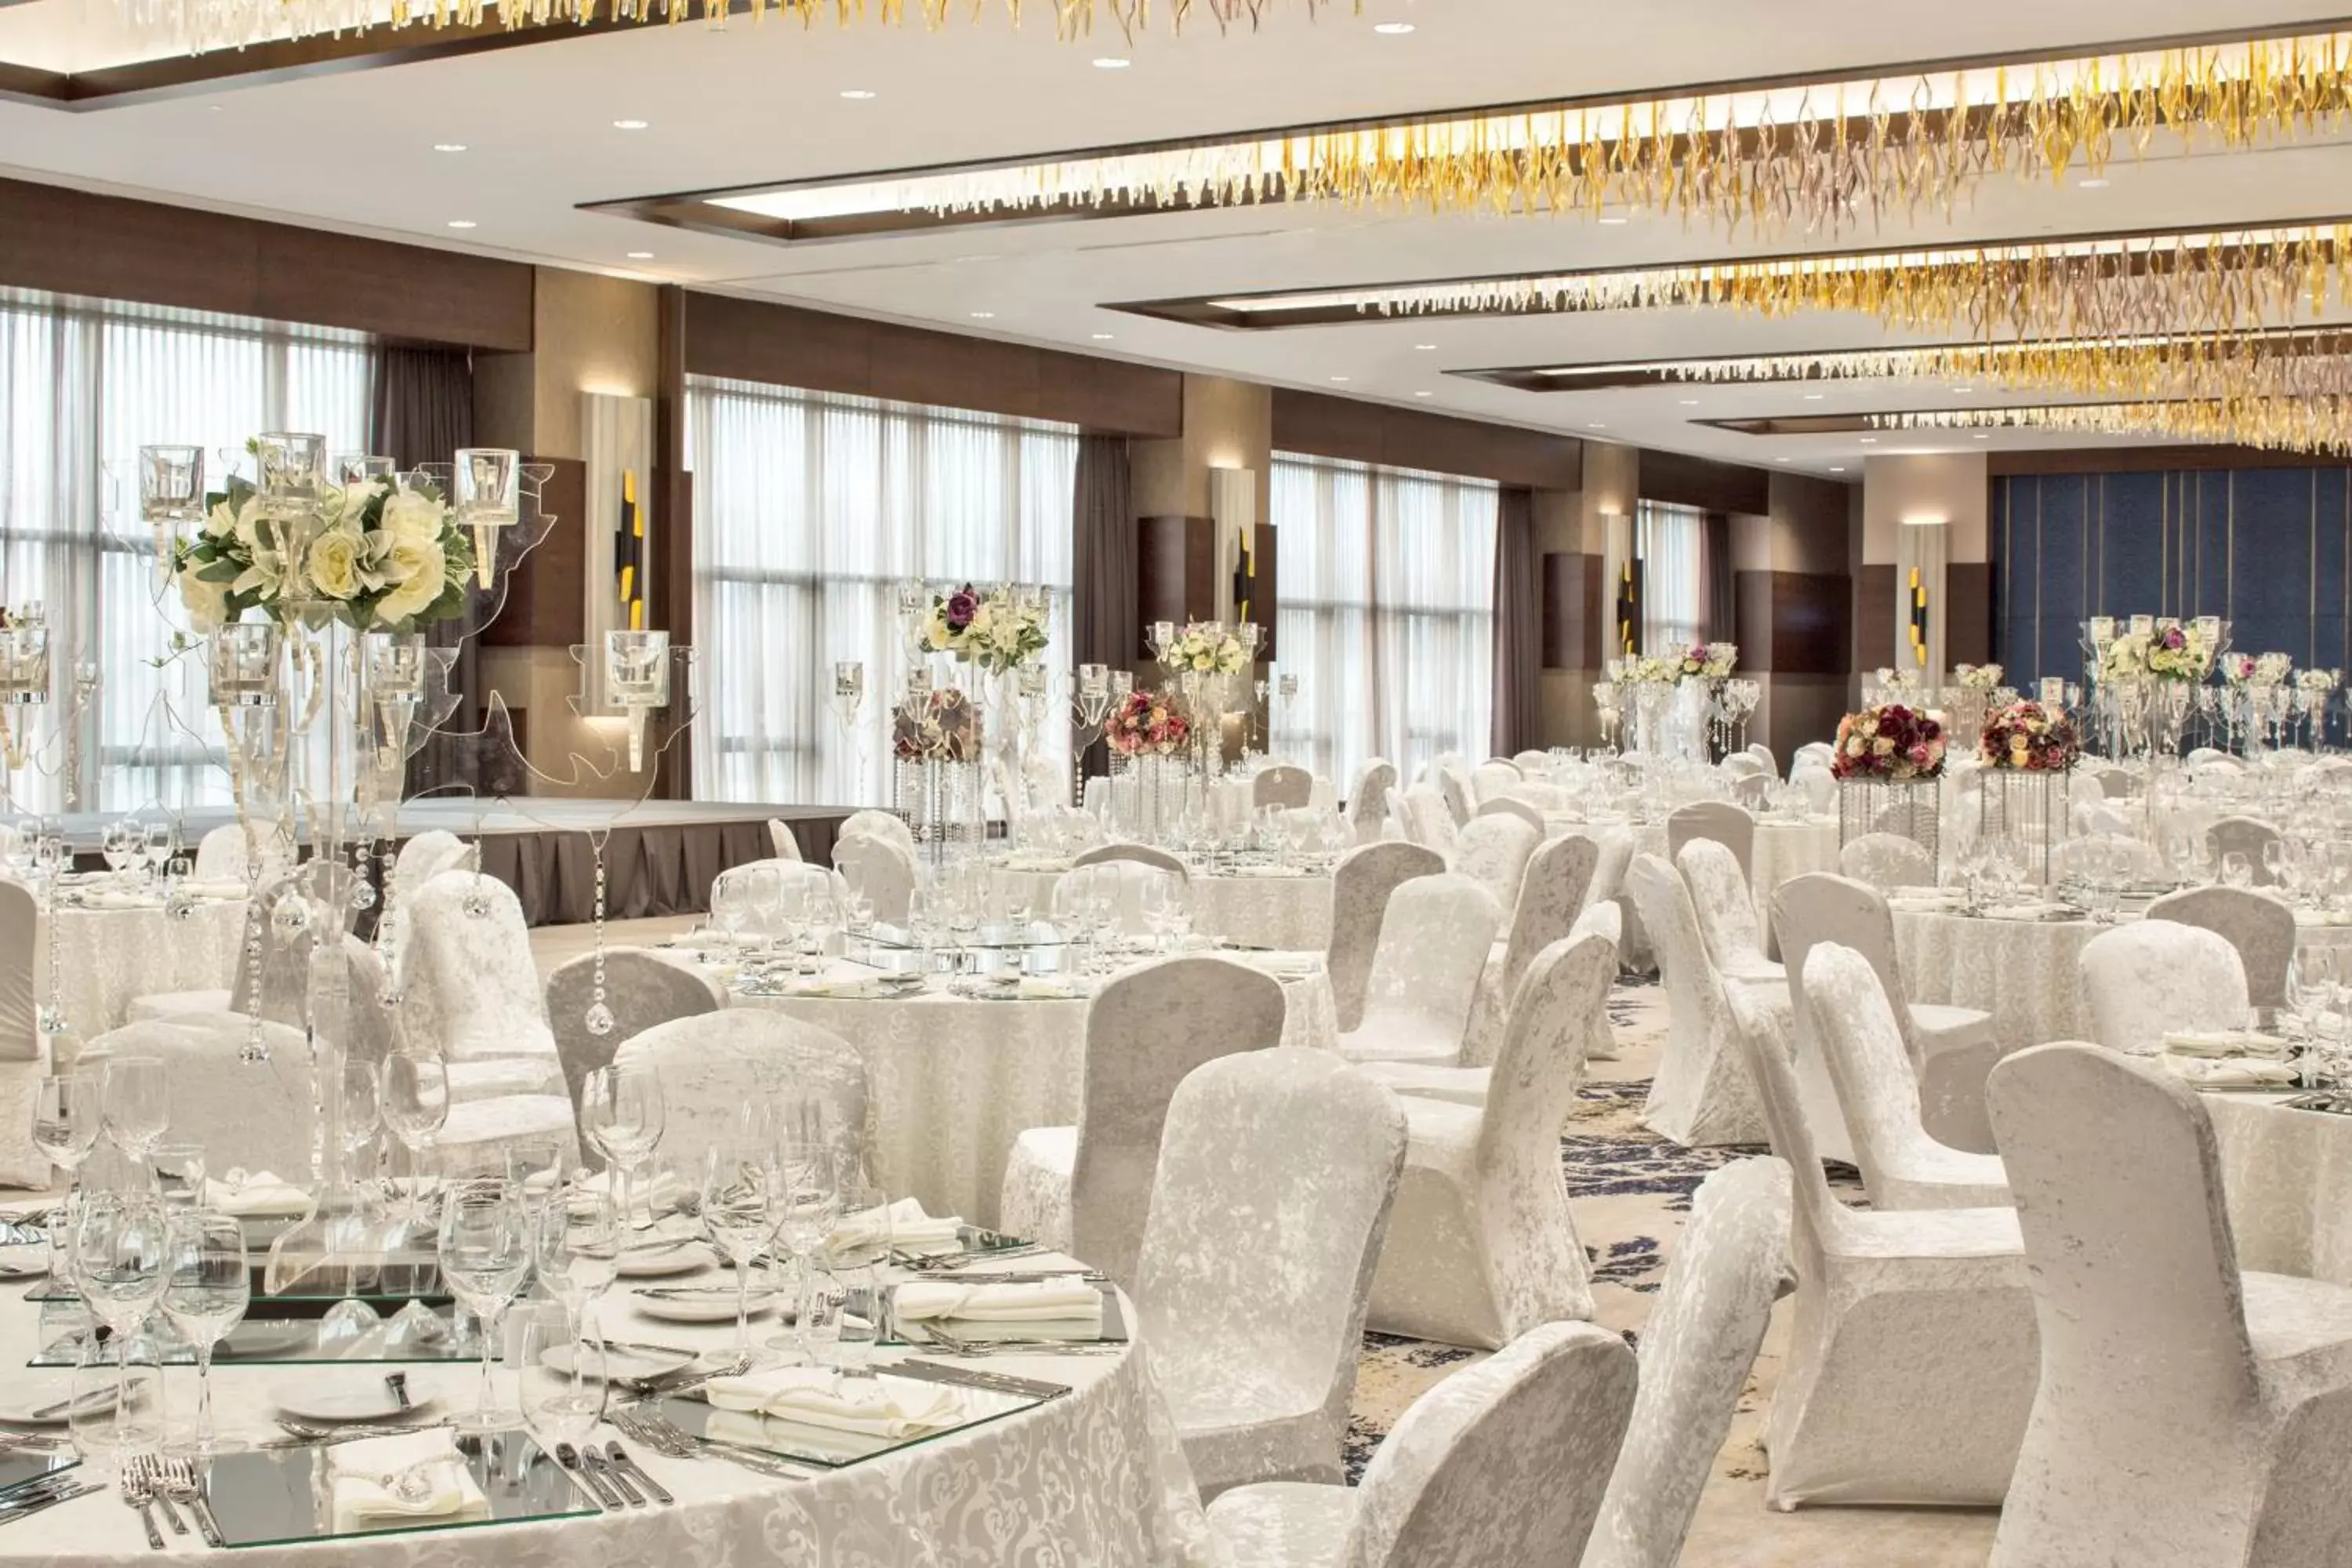 Meeting/conference room, Banquet Facilities in Sheraton Grand Istanbul Atasehir